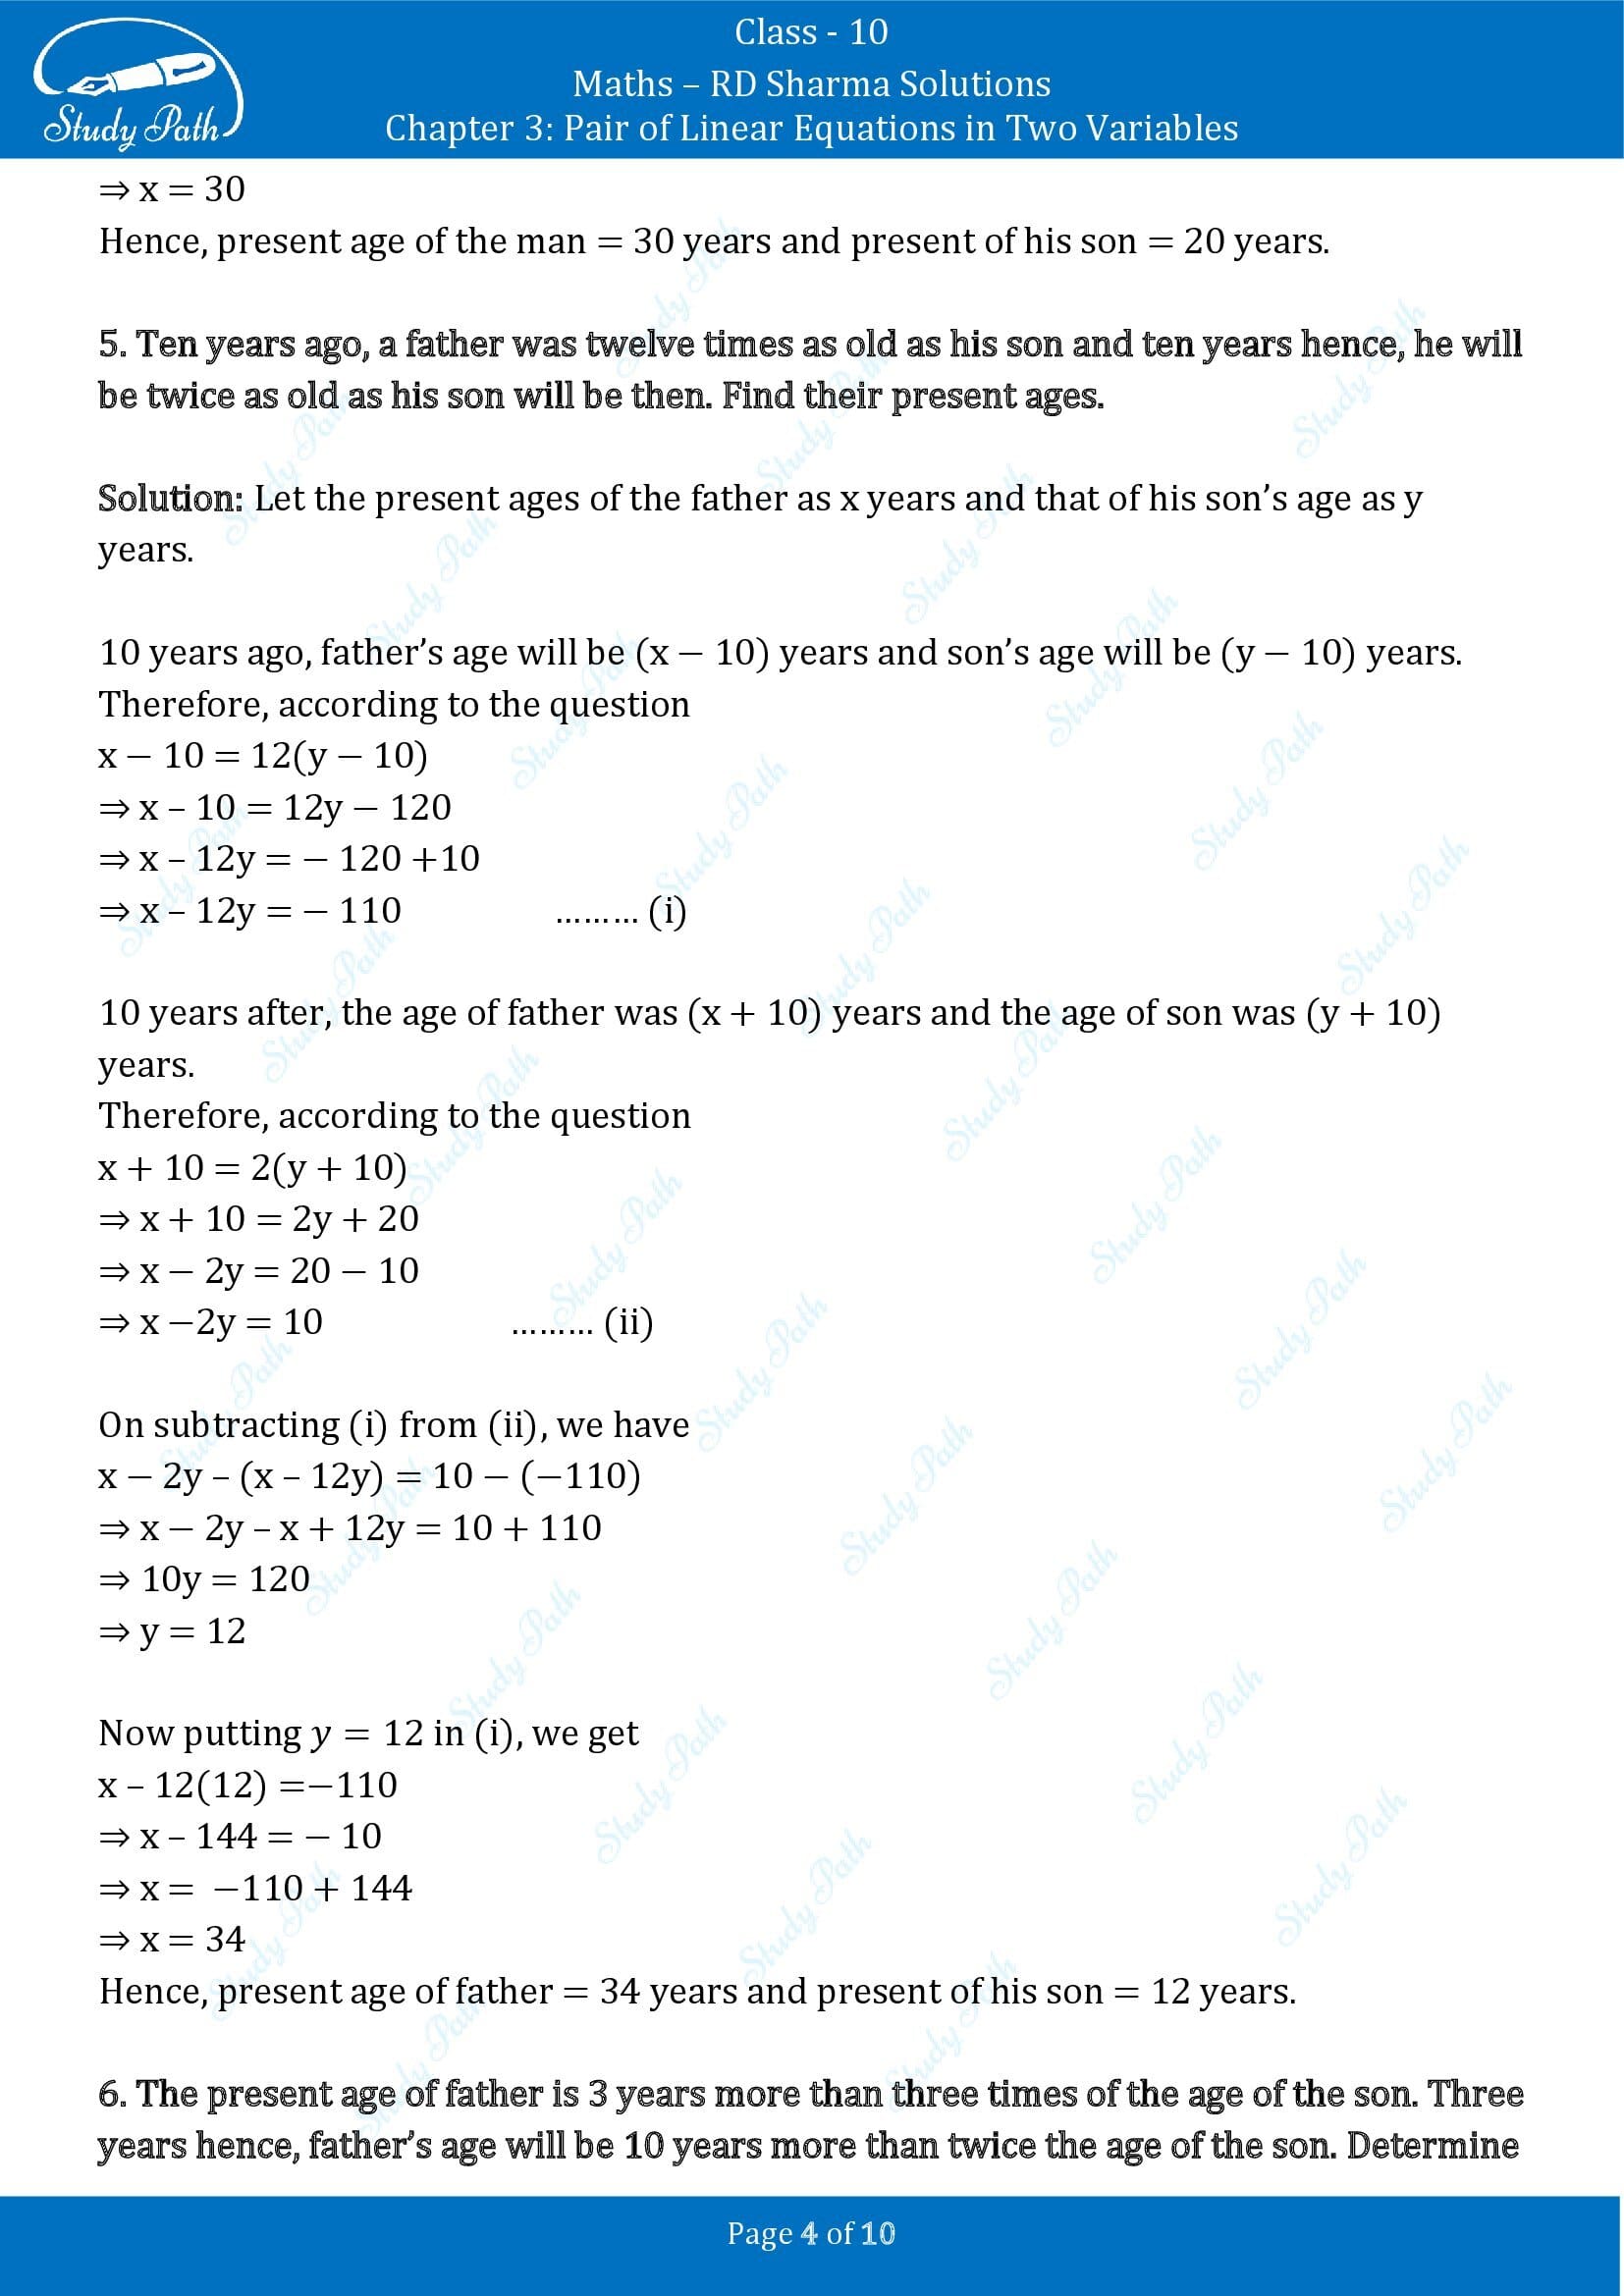 RD Sharma Solutions Class 10 Chapter 3 Pair of Linear Equations in Two Variables Exercise 3.9 00004